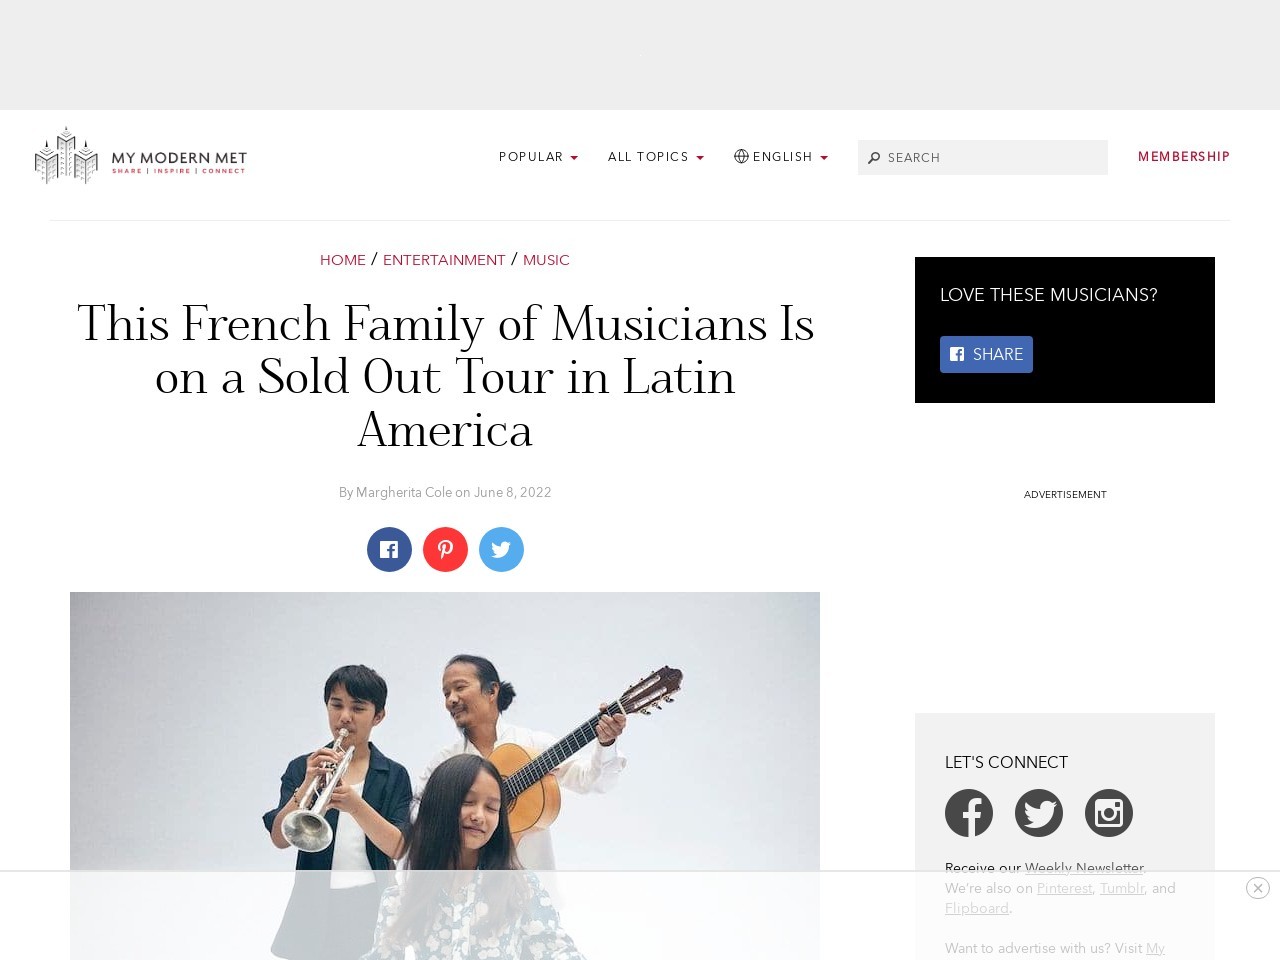 French Family of Musicians is Selling Out in Latin America